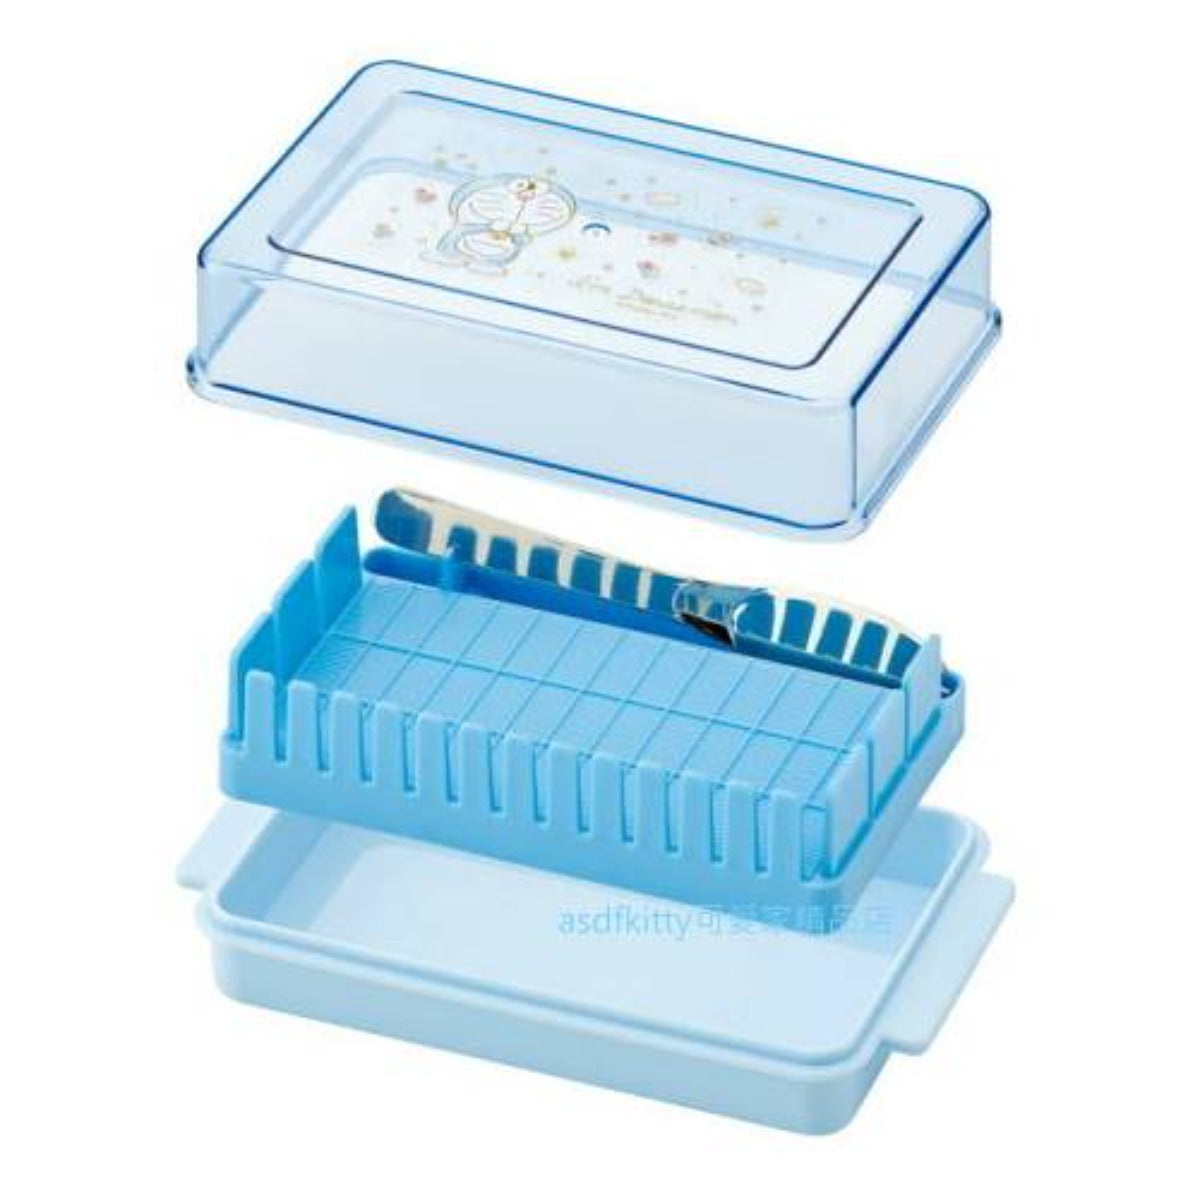 Butter Case - Doraemon Glitter Pastel with Cutting Guide (Japan Edition)